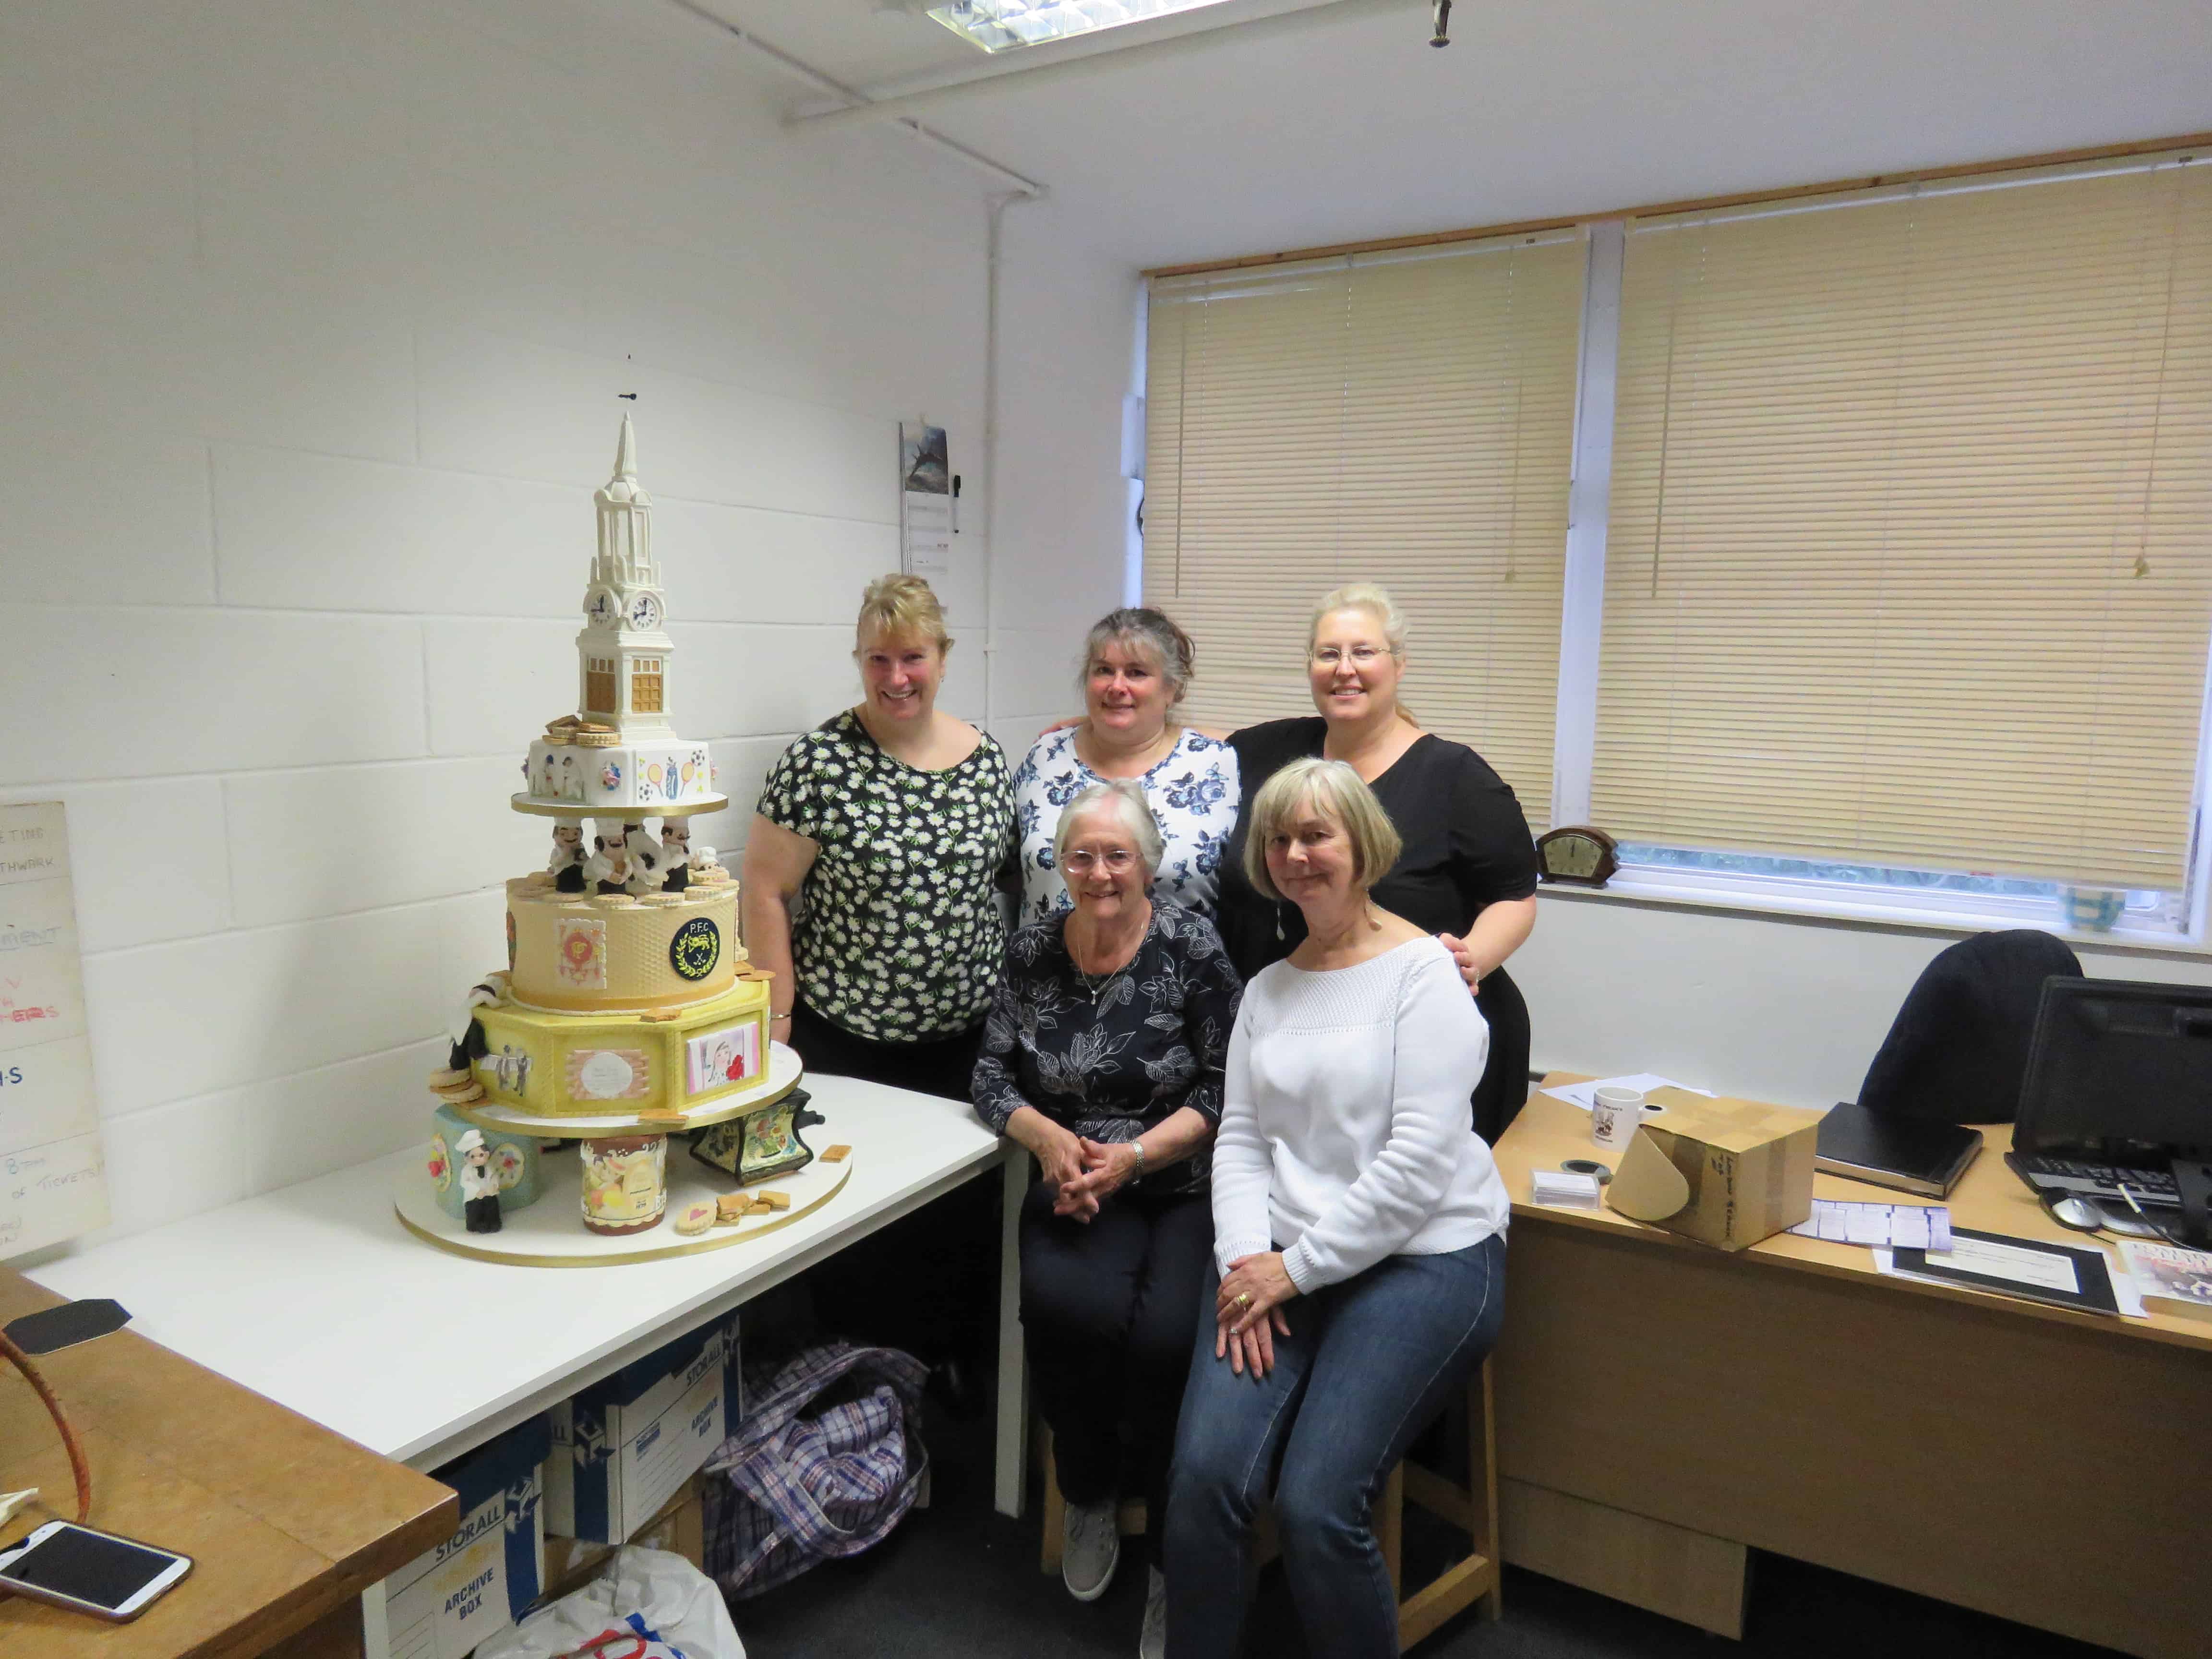 The cake, pictured alongside members of the British Guild of Sugarcraft who created it